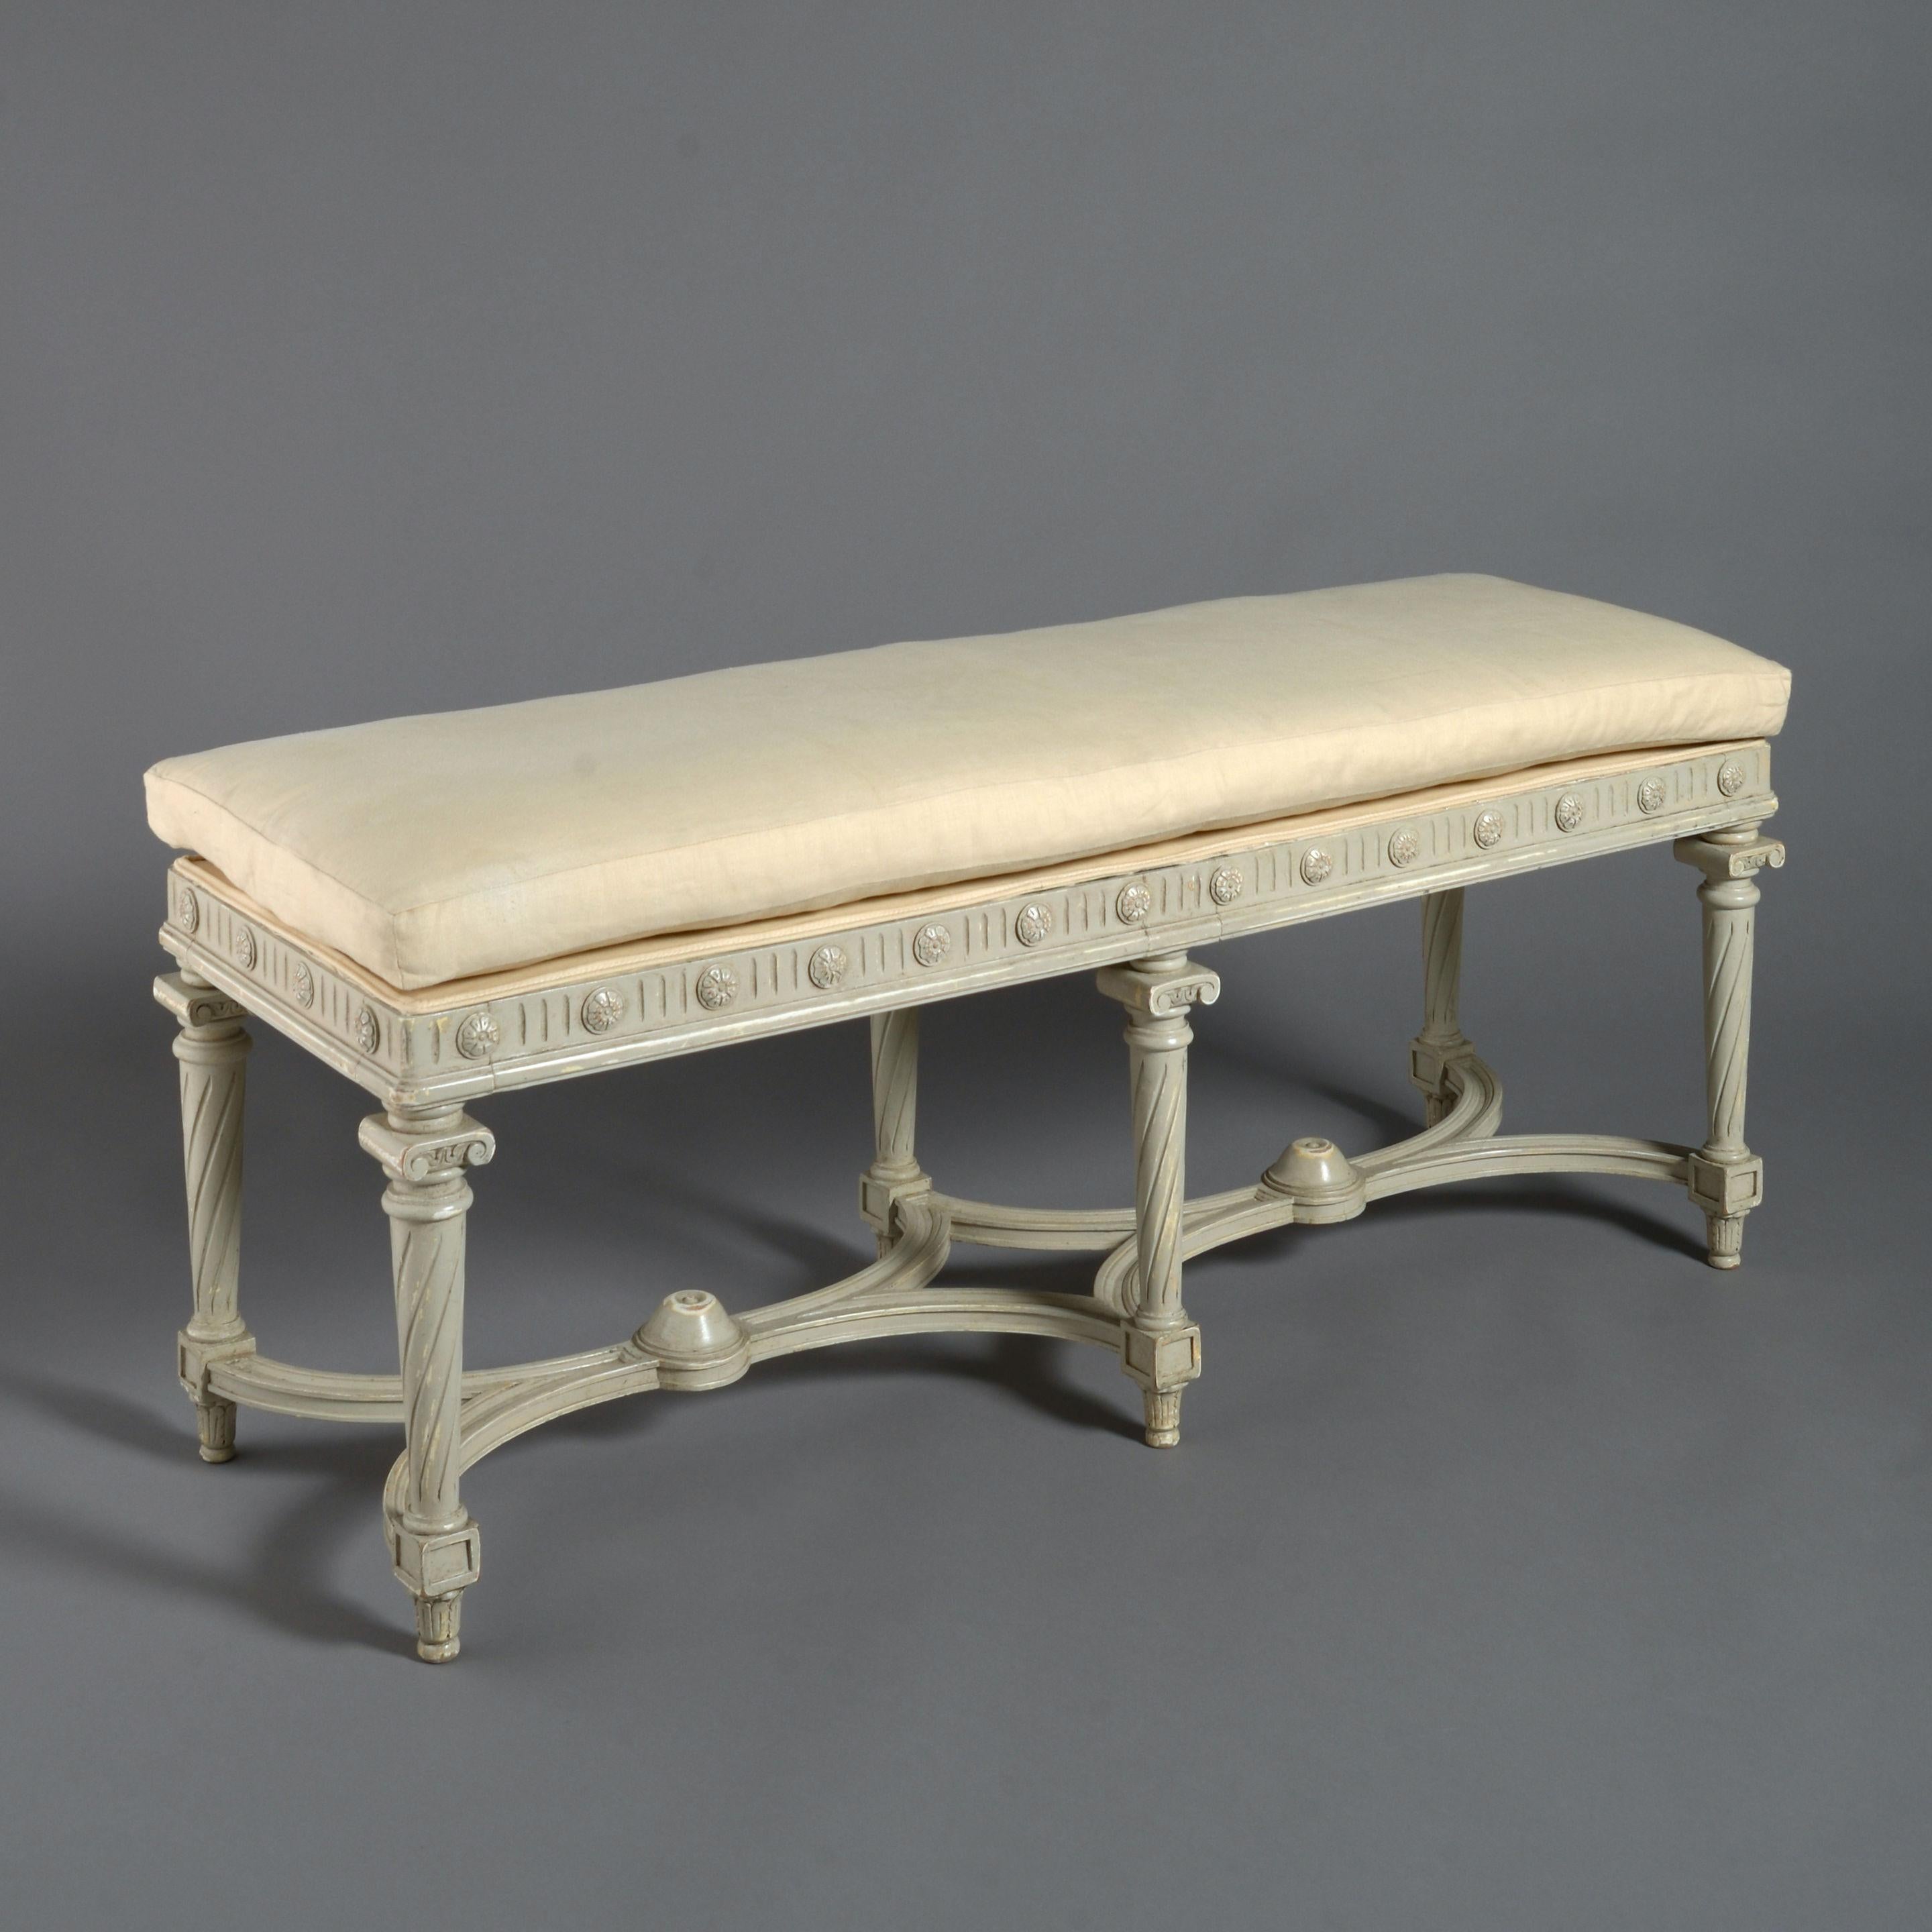 A late 19th century grey painted upholstered long stool in the Louis XVI style, a frieze of triglyphs and paterae set above six tapering spiral fluted column legs each headed with an ionic capital and all conjoined by concave stretchers. With a